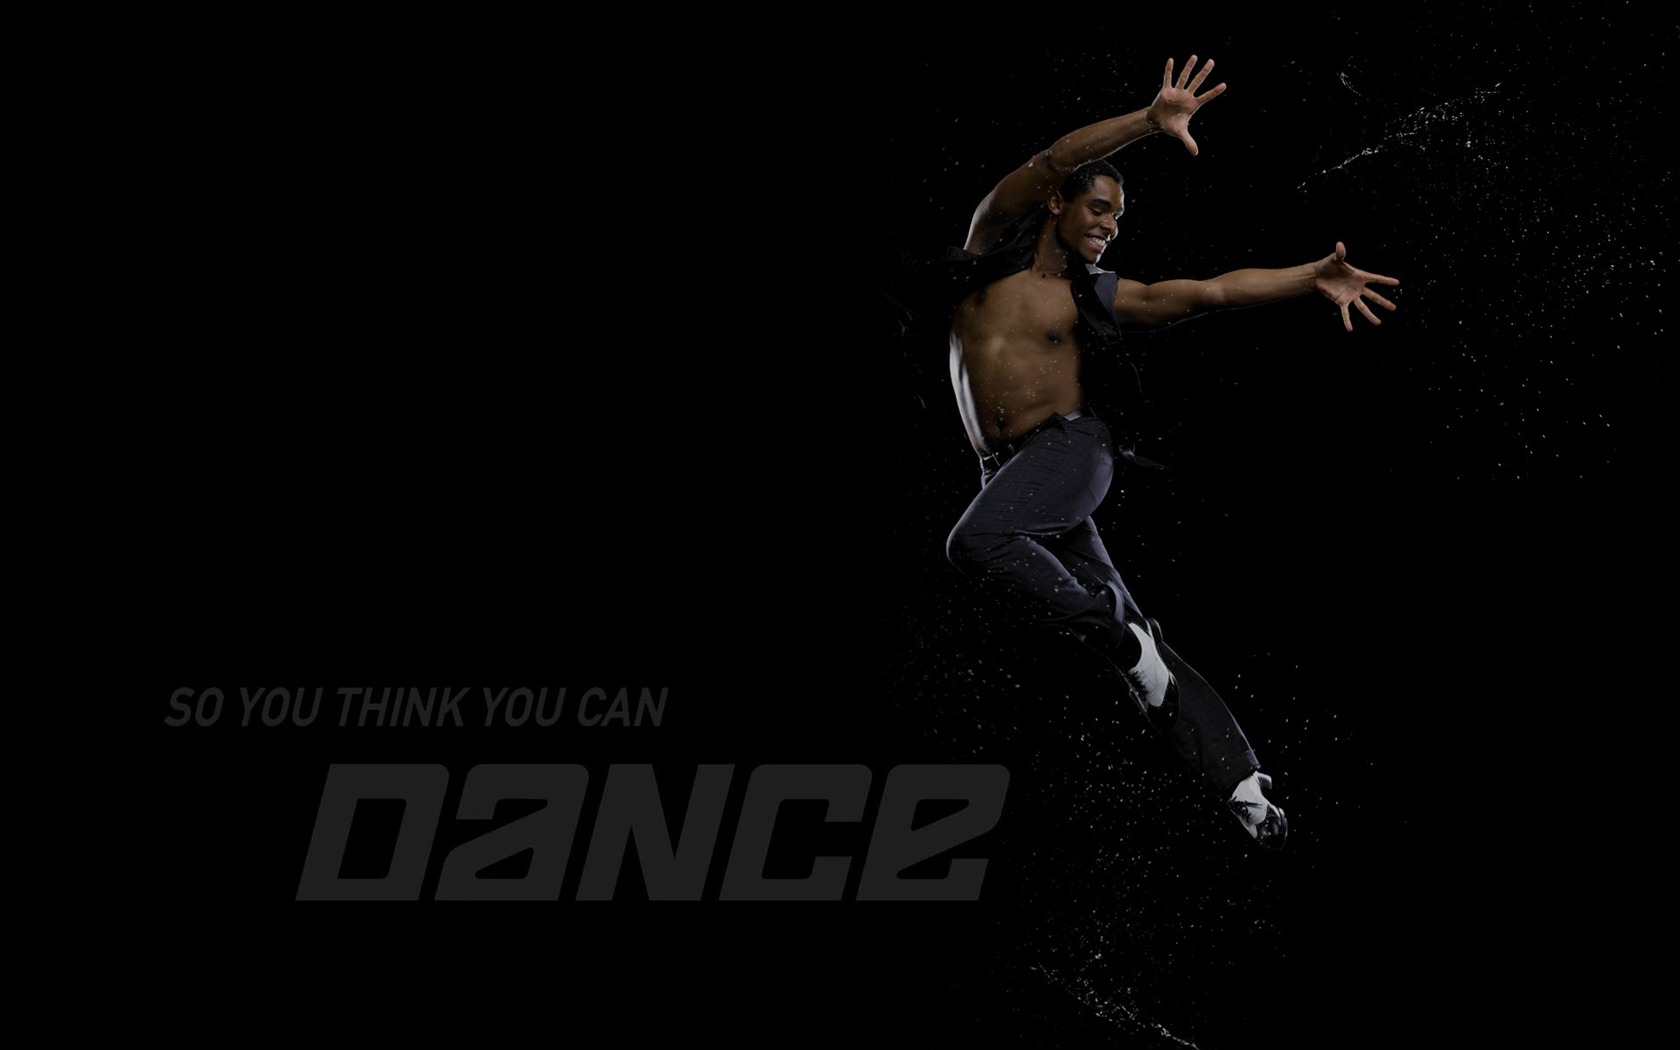 So You Think You Can Dance wallpaper (2) #20 - 1680x1050